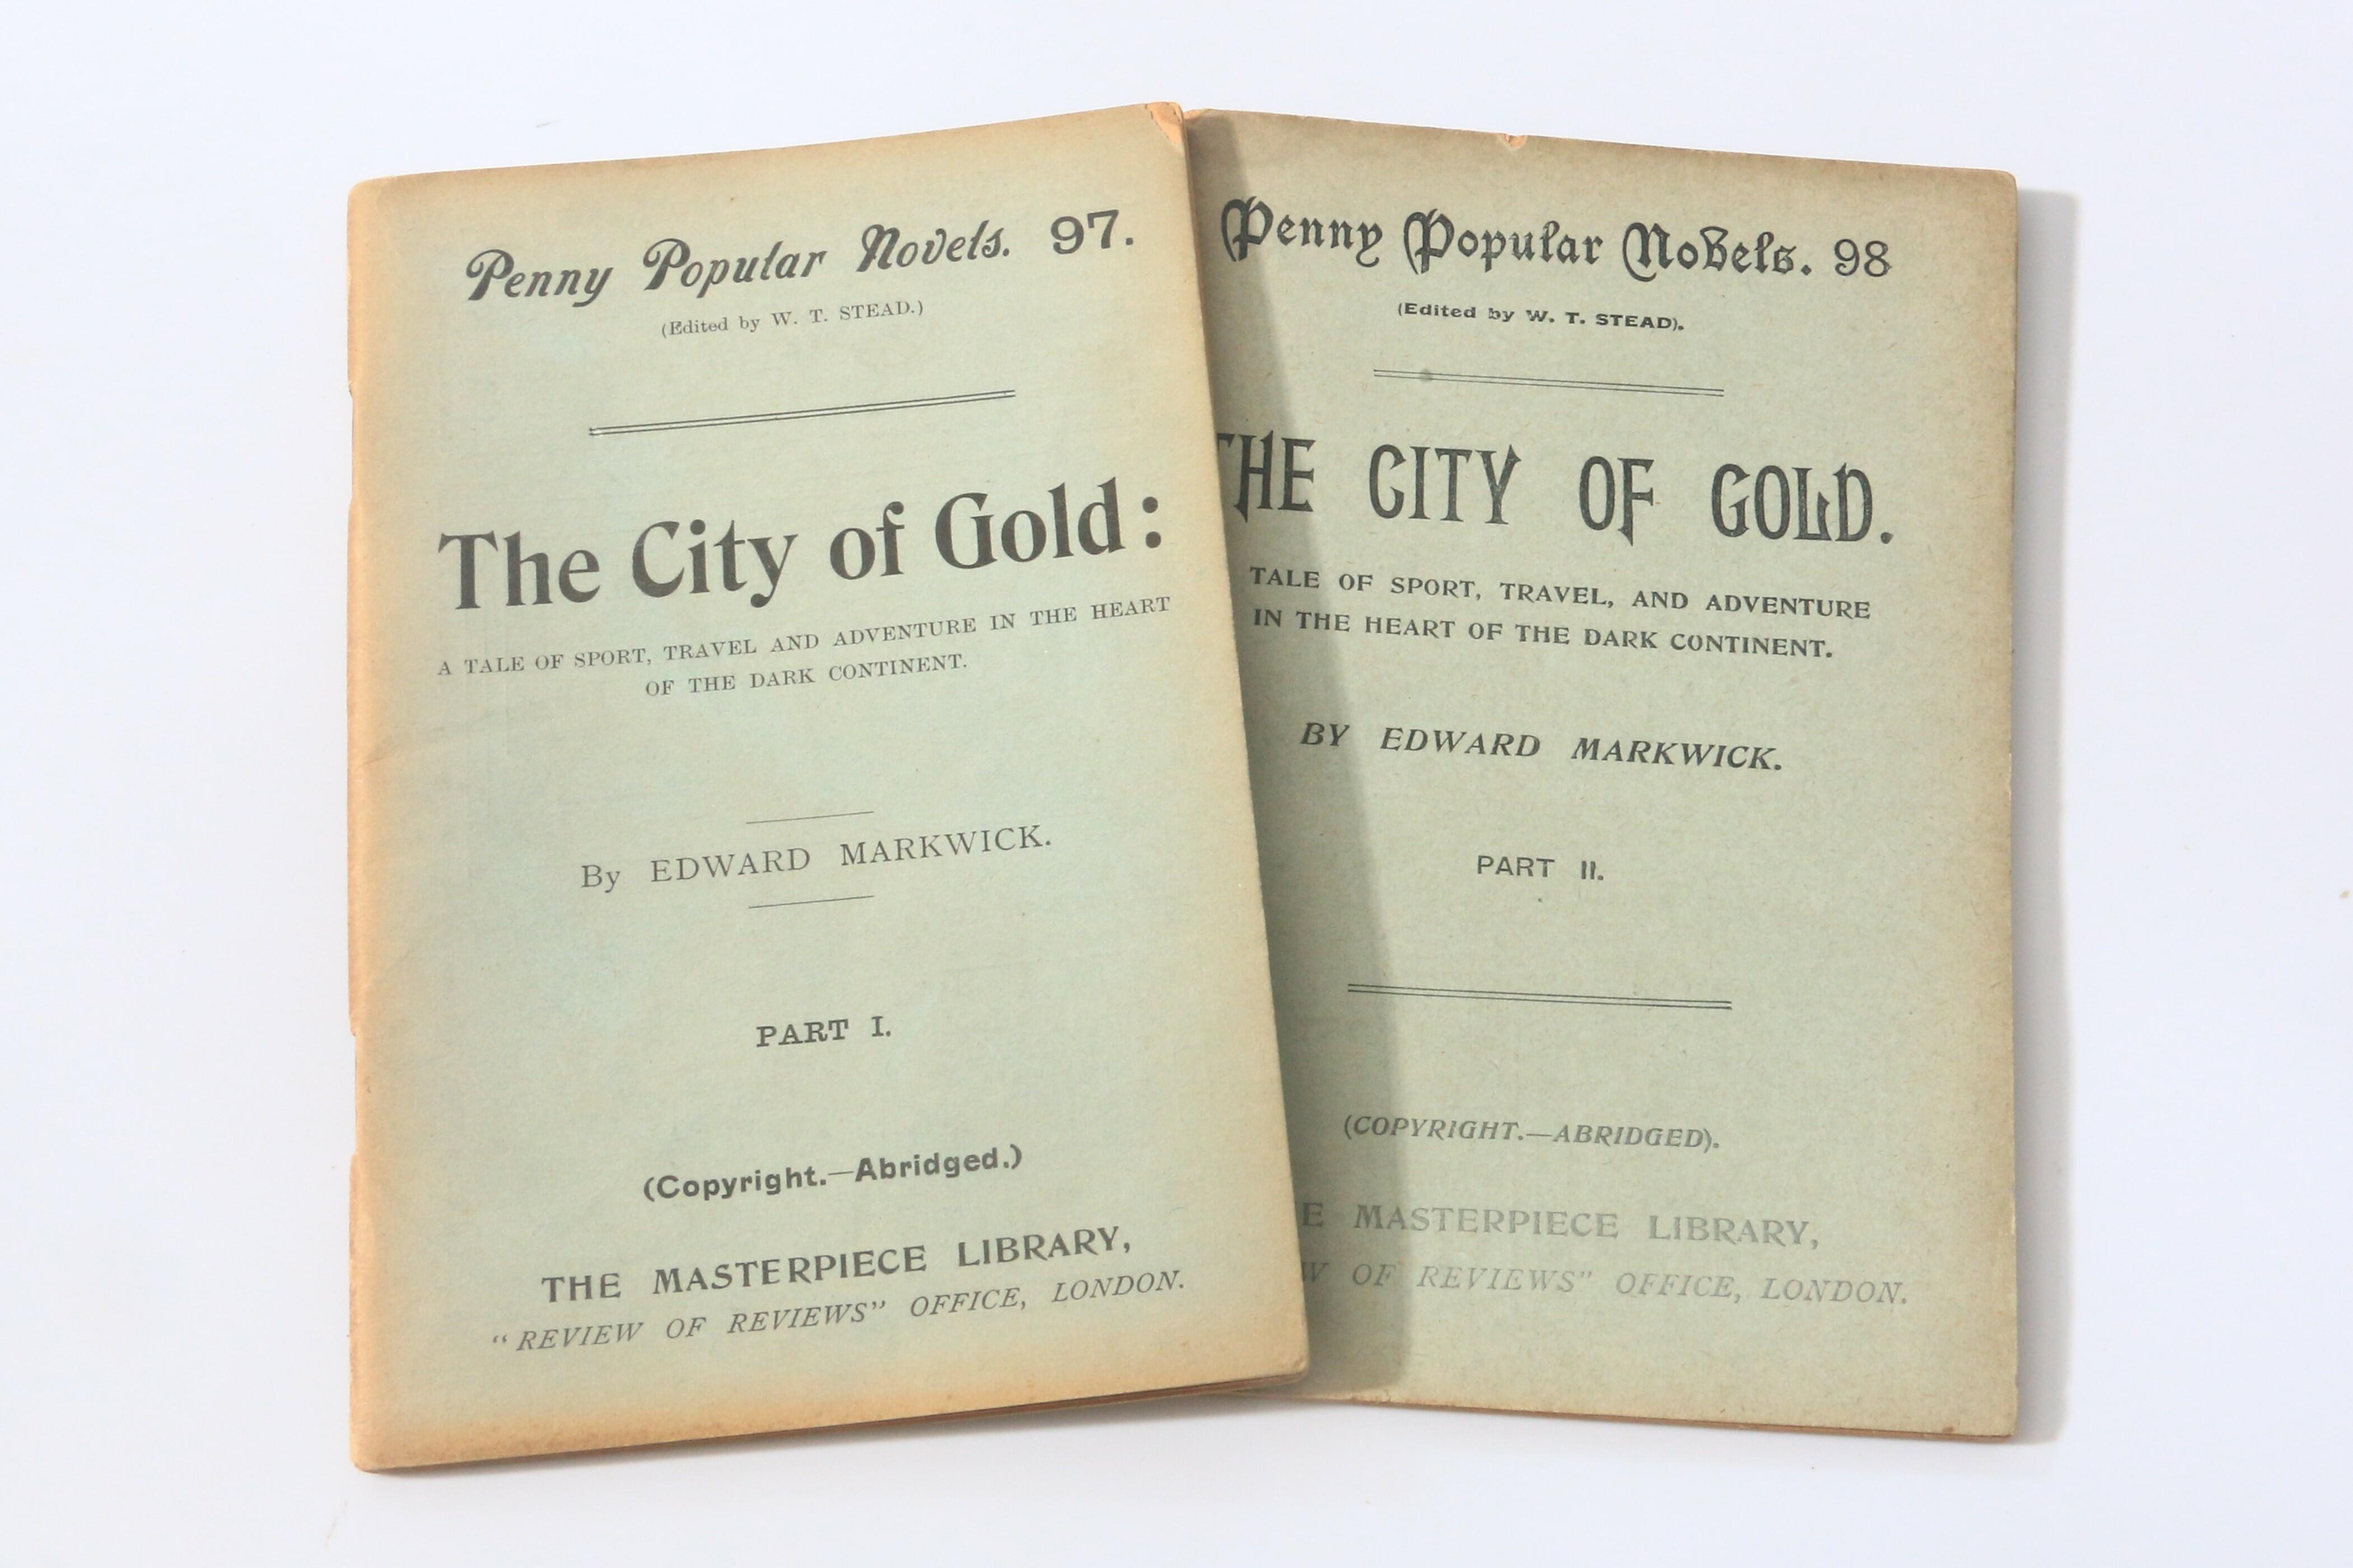 Edward Markwick - The City of Gold [published as part of] W.T. Stead's Penny Popular Novels [#98] - The Masterpiece Library, nd, Later Edition.